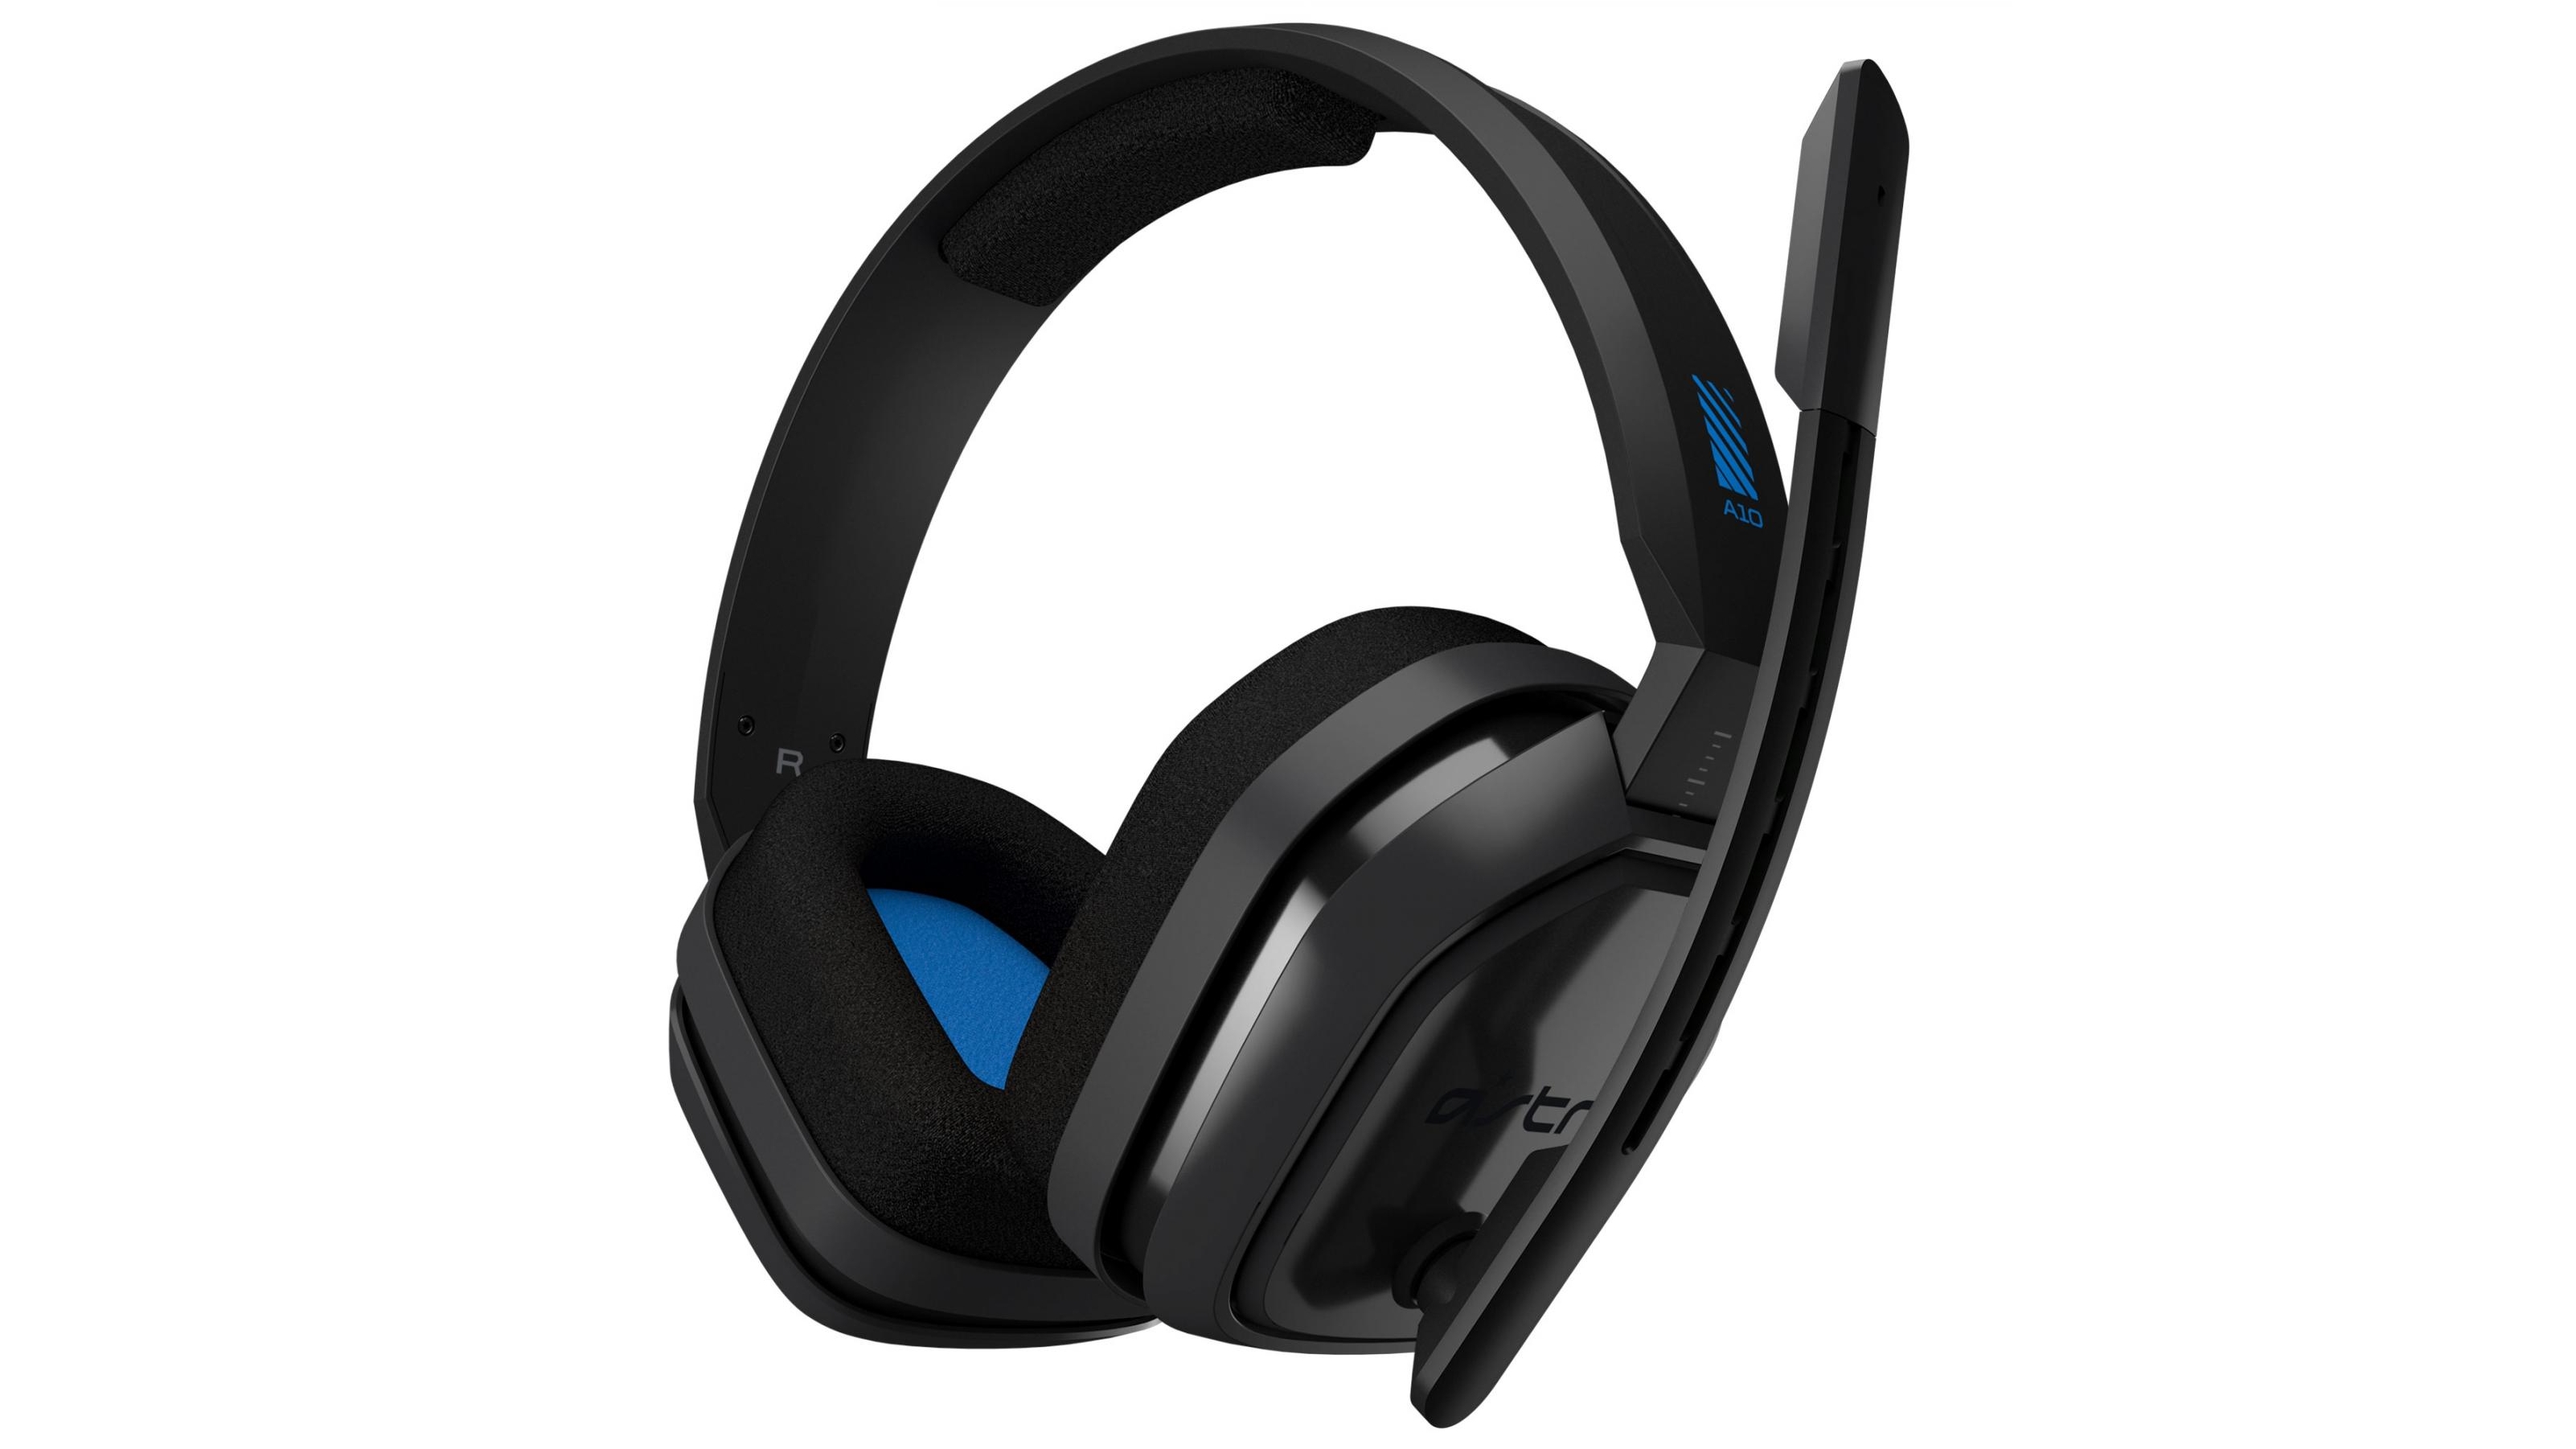 ps4 headset with independent chat and game volume